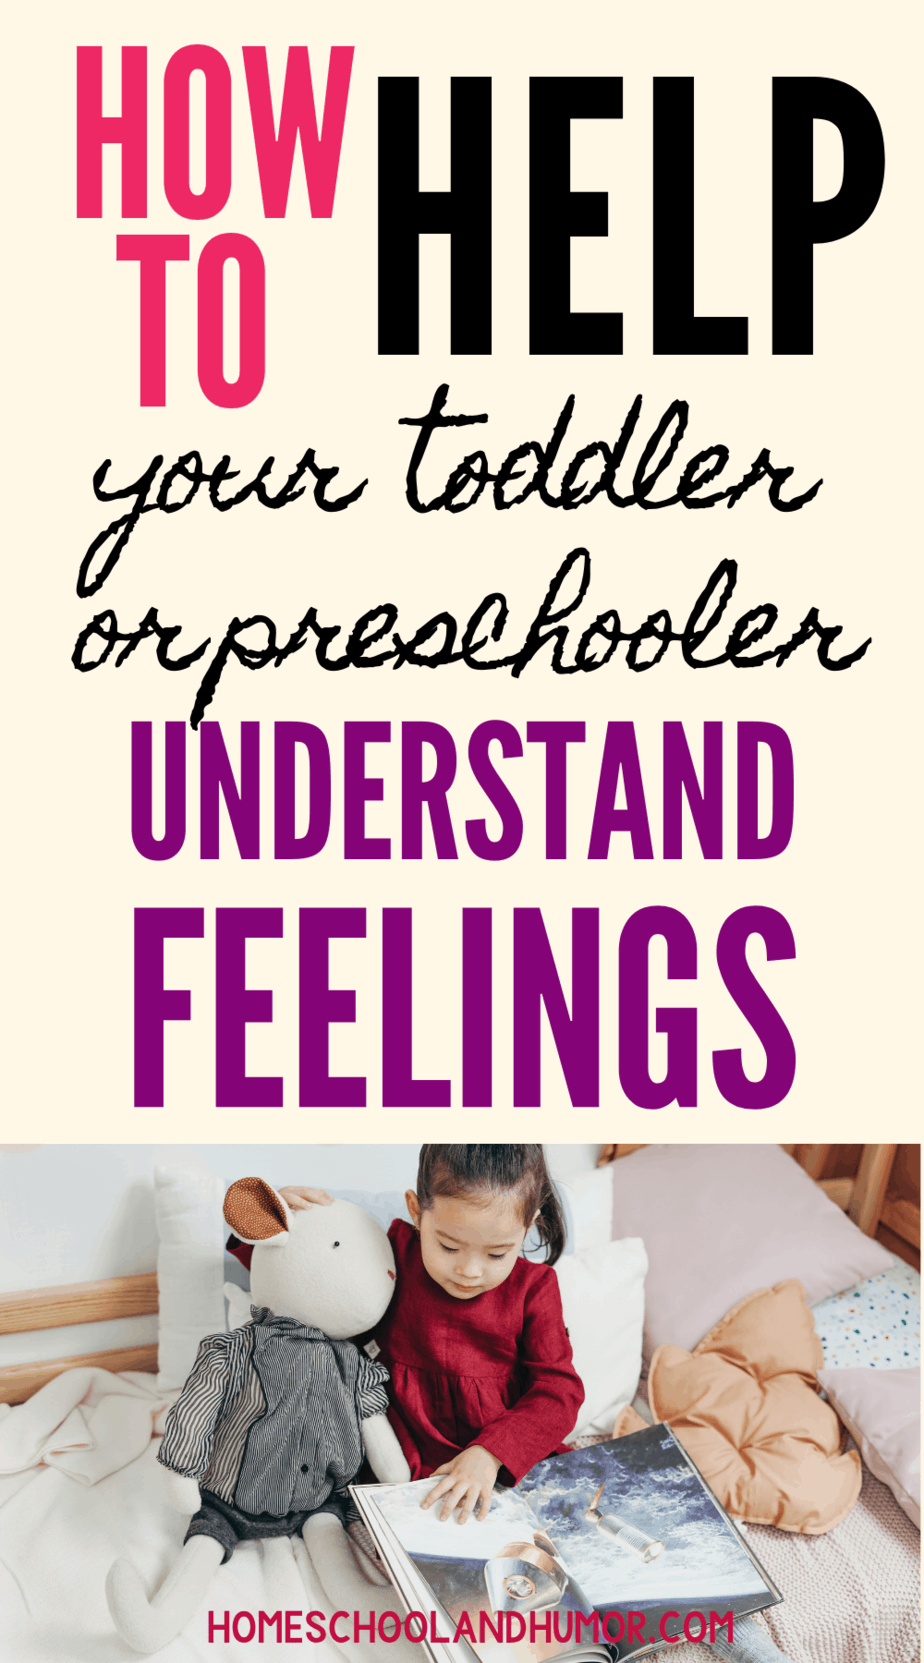 A Whole Bunch of Feelings: A Book About Feelings For Kids